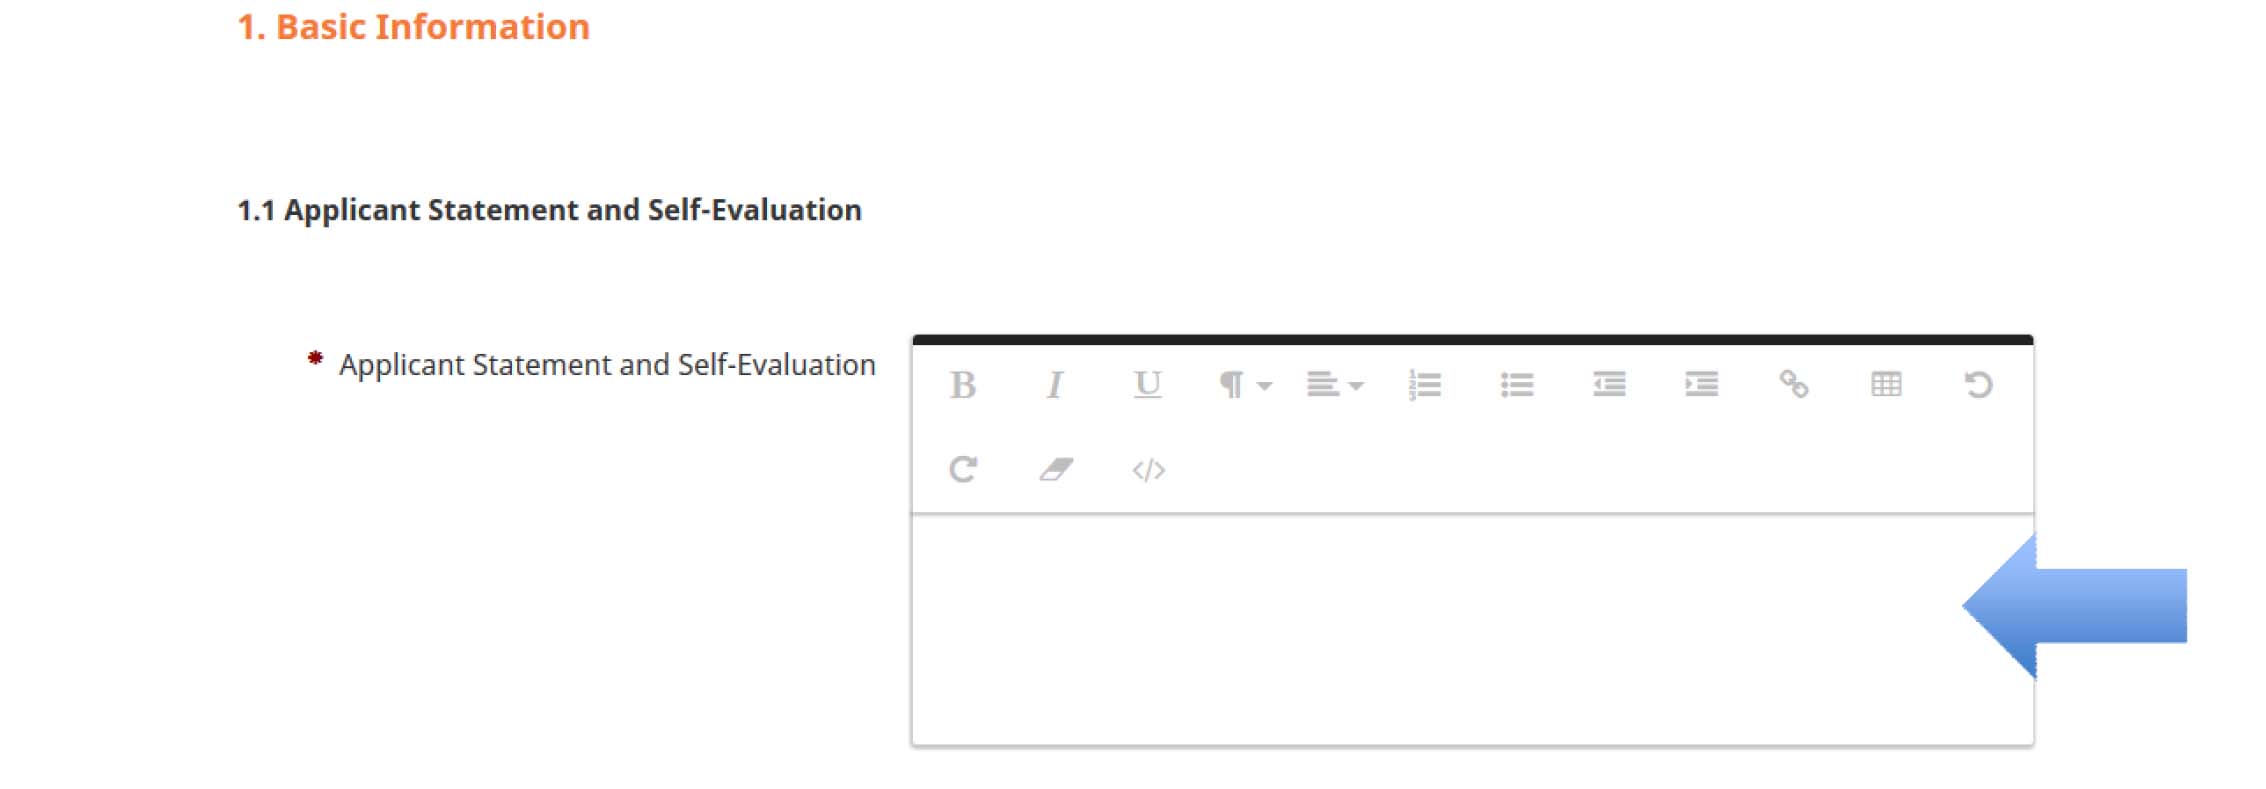 Type and proofread your Applicant Statement and Self-Evaluation in a word processing document. When it is formatted and proofread, copy and paste the contents into the text box.